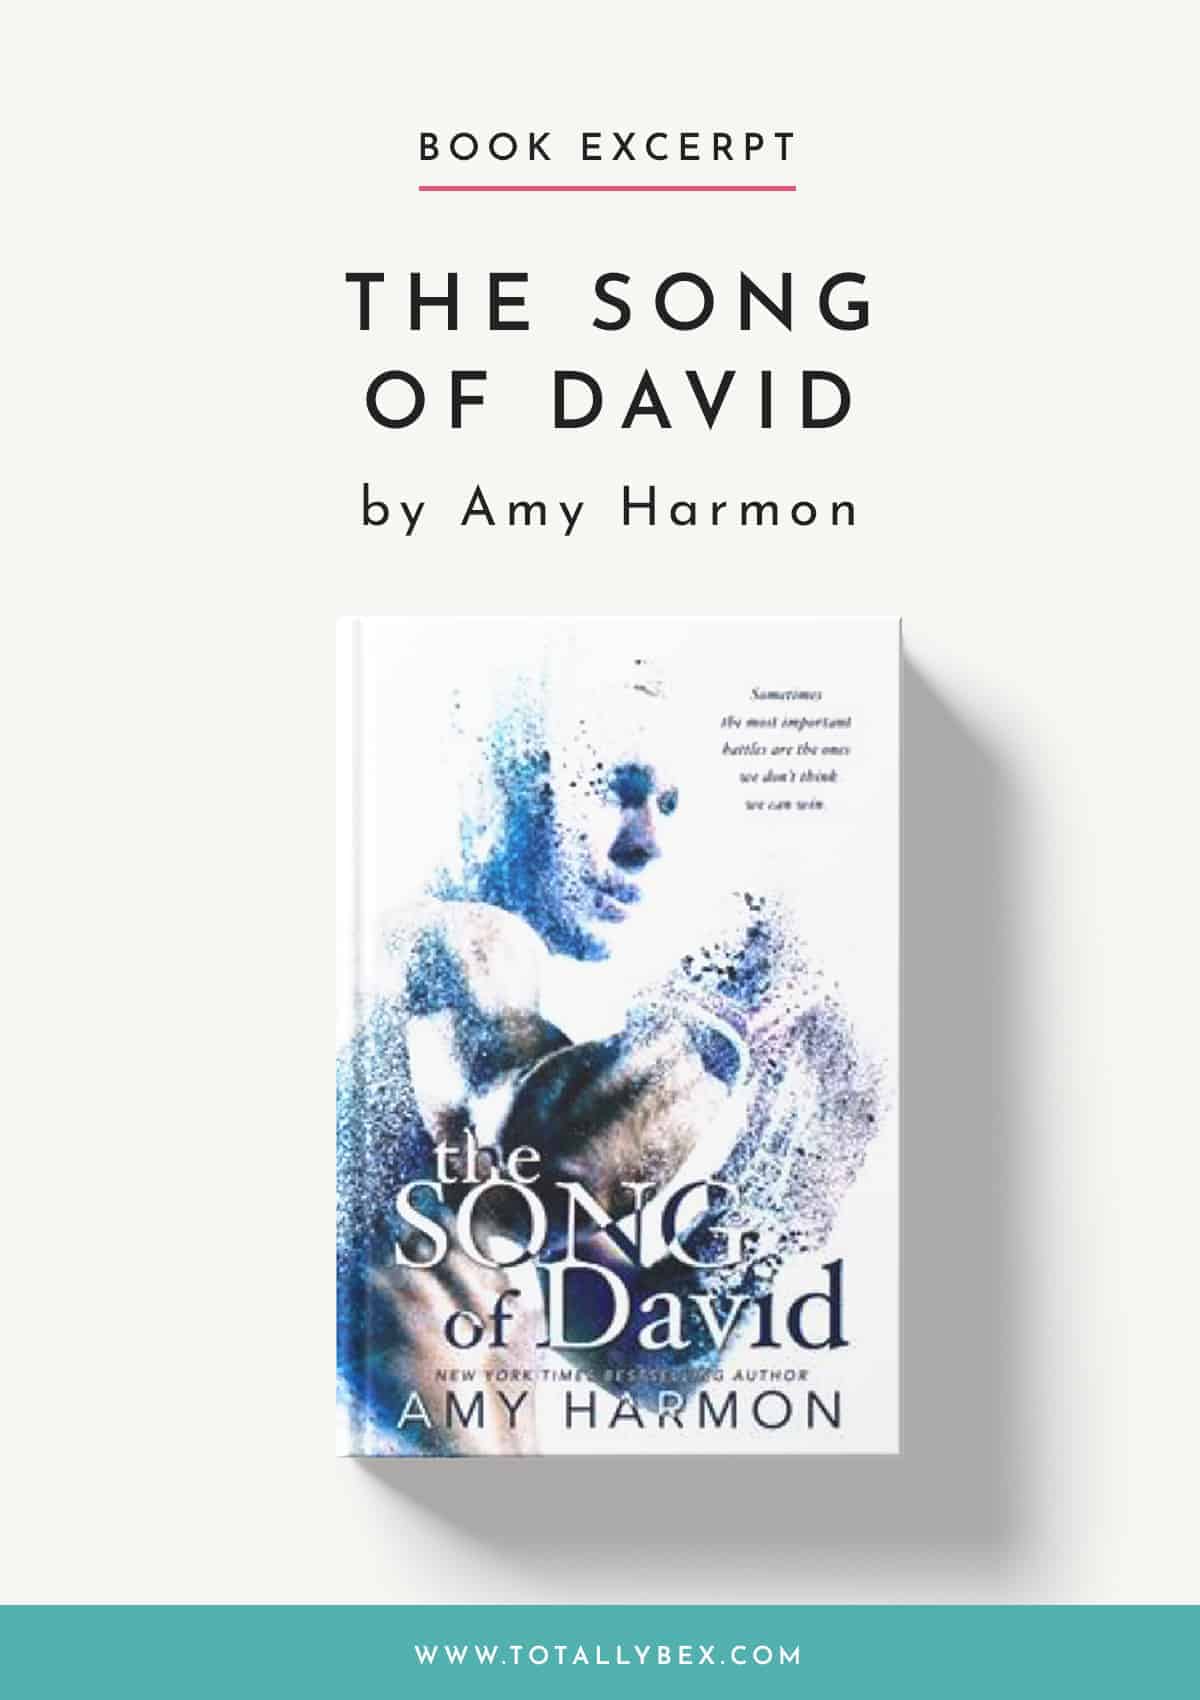 The Song of David by Amy Harmon-Book Excerpt